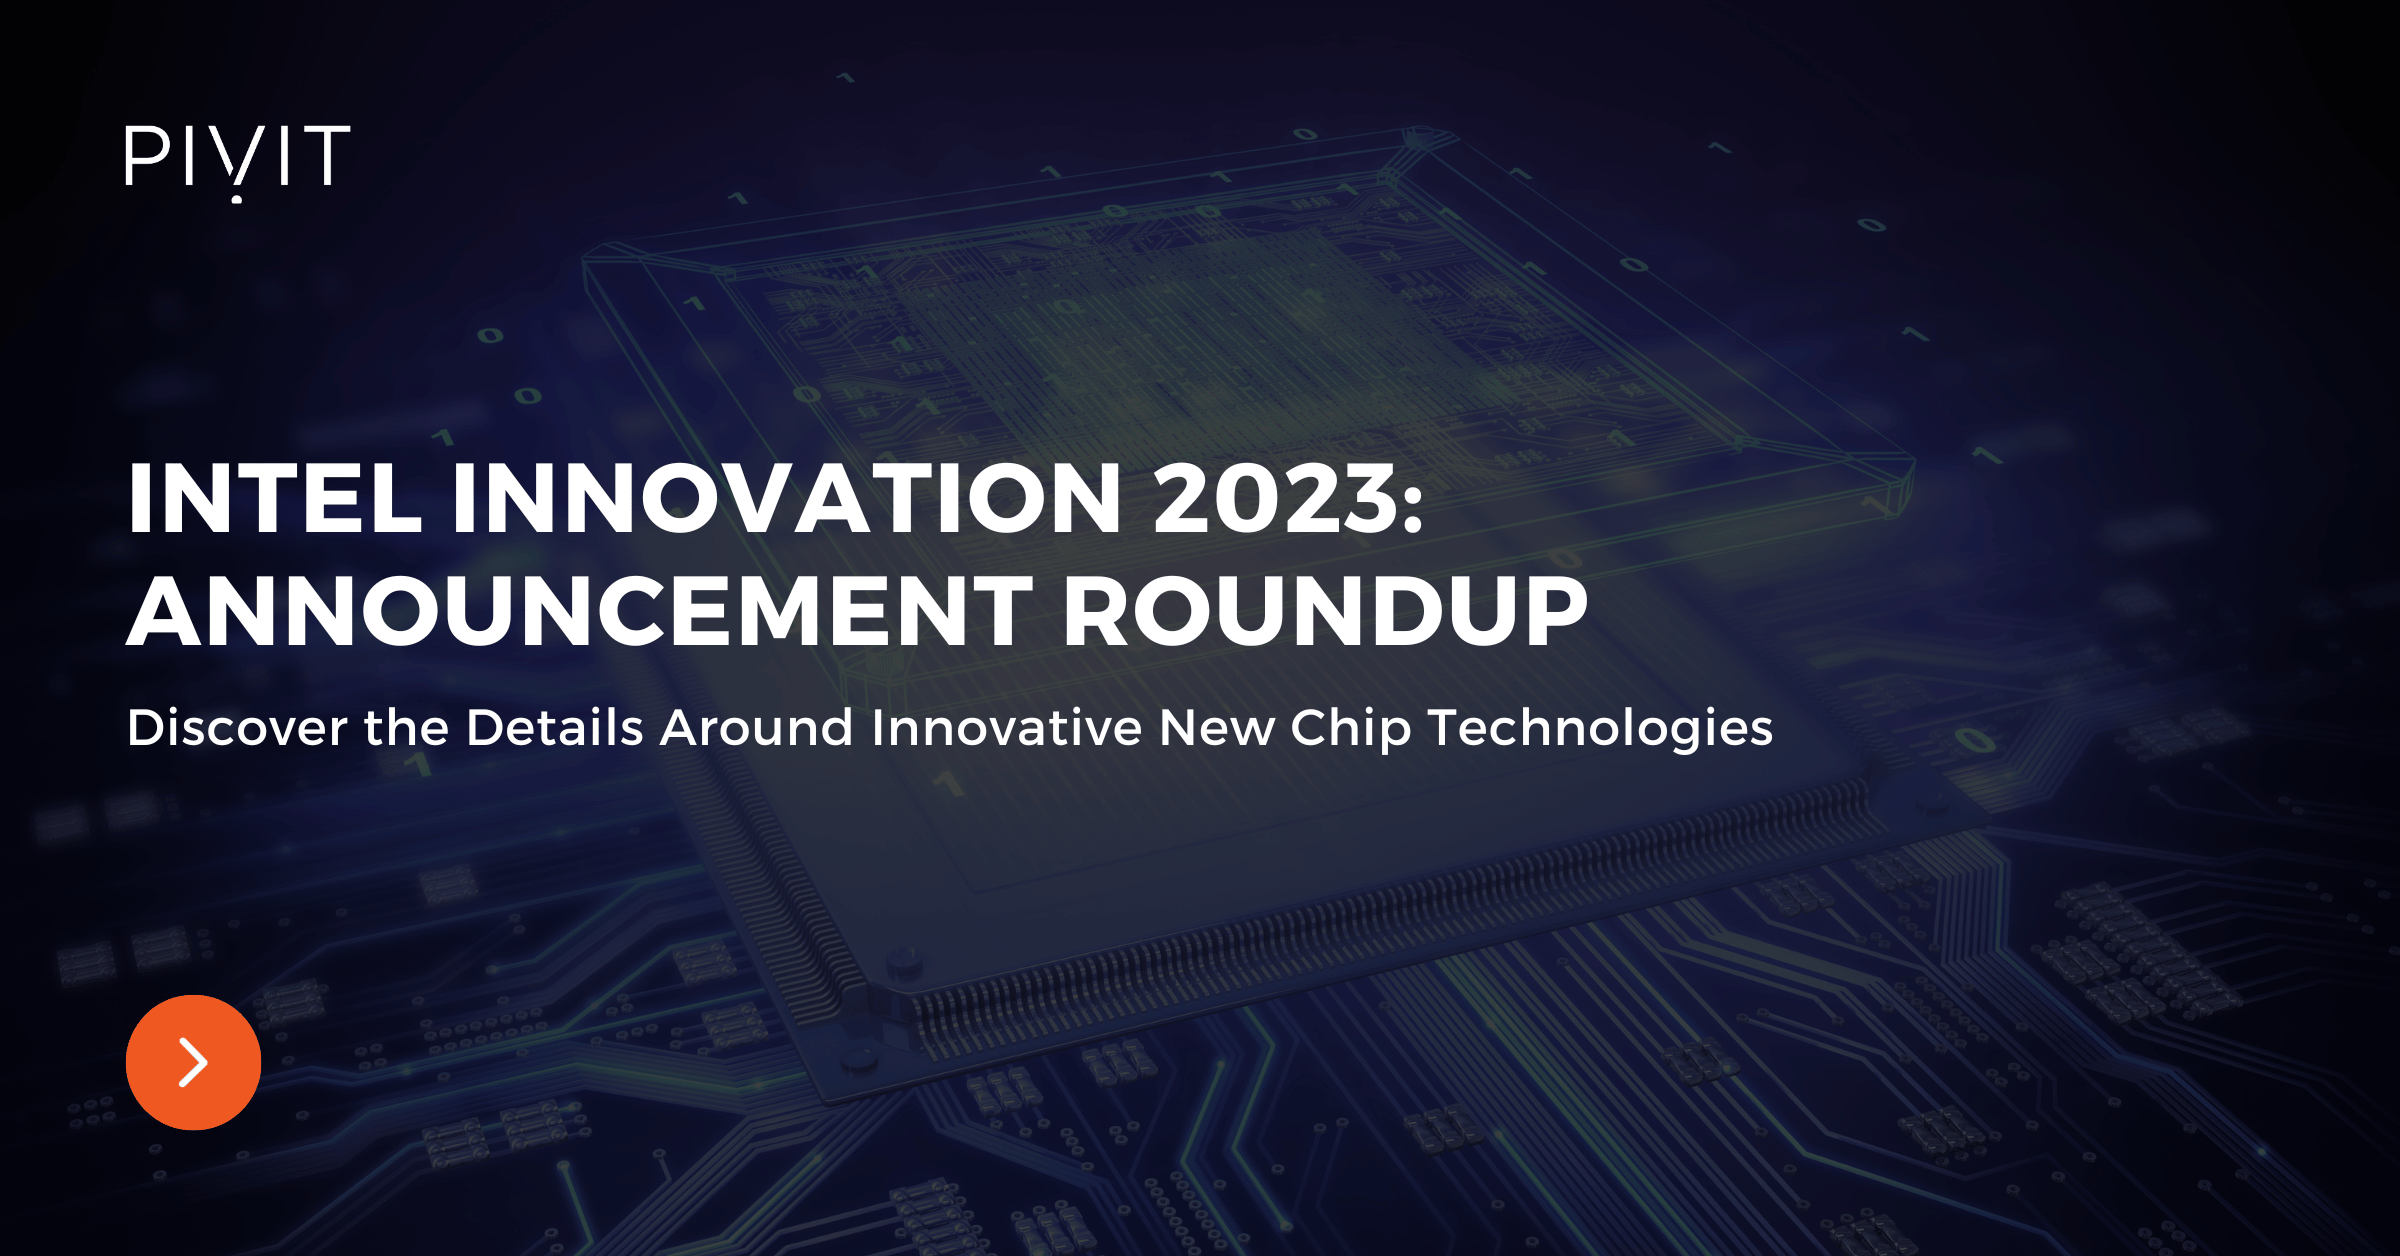 Intel Innovation 2023: Announcement Roundup - Discover the Details Around Innovative New Chip Technologies